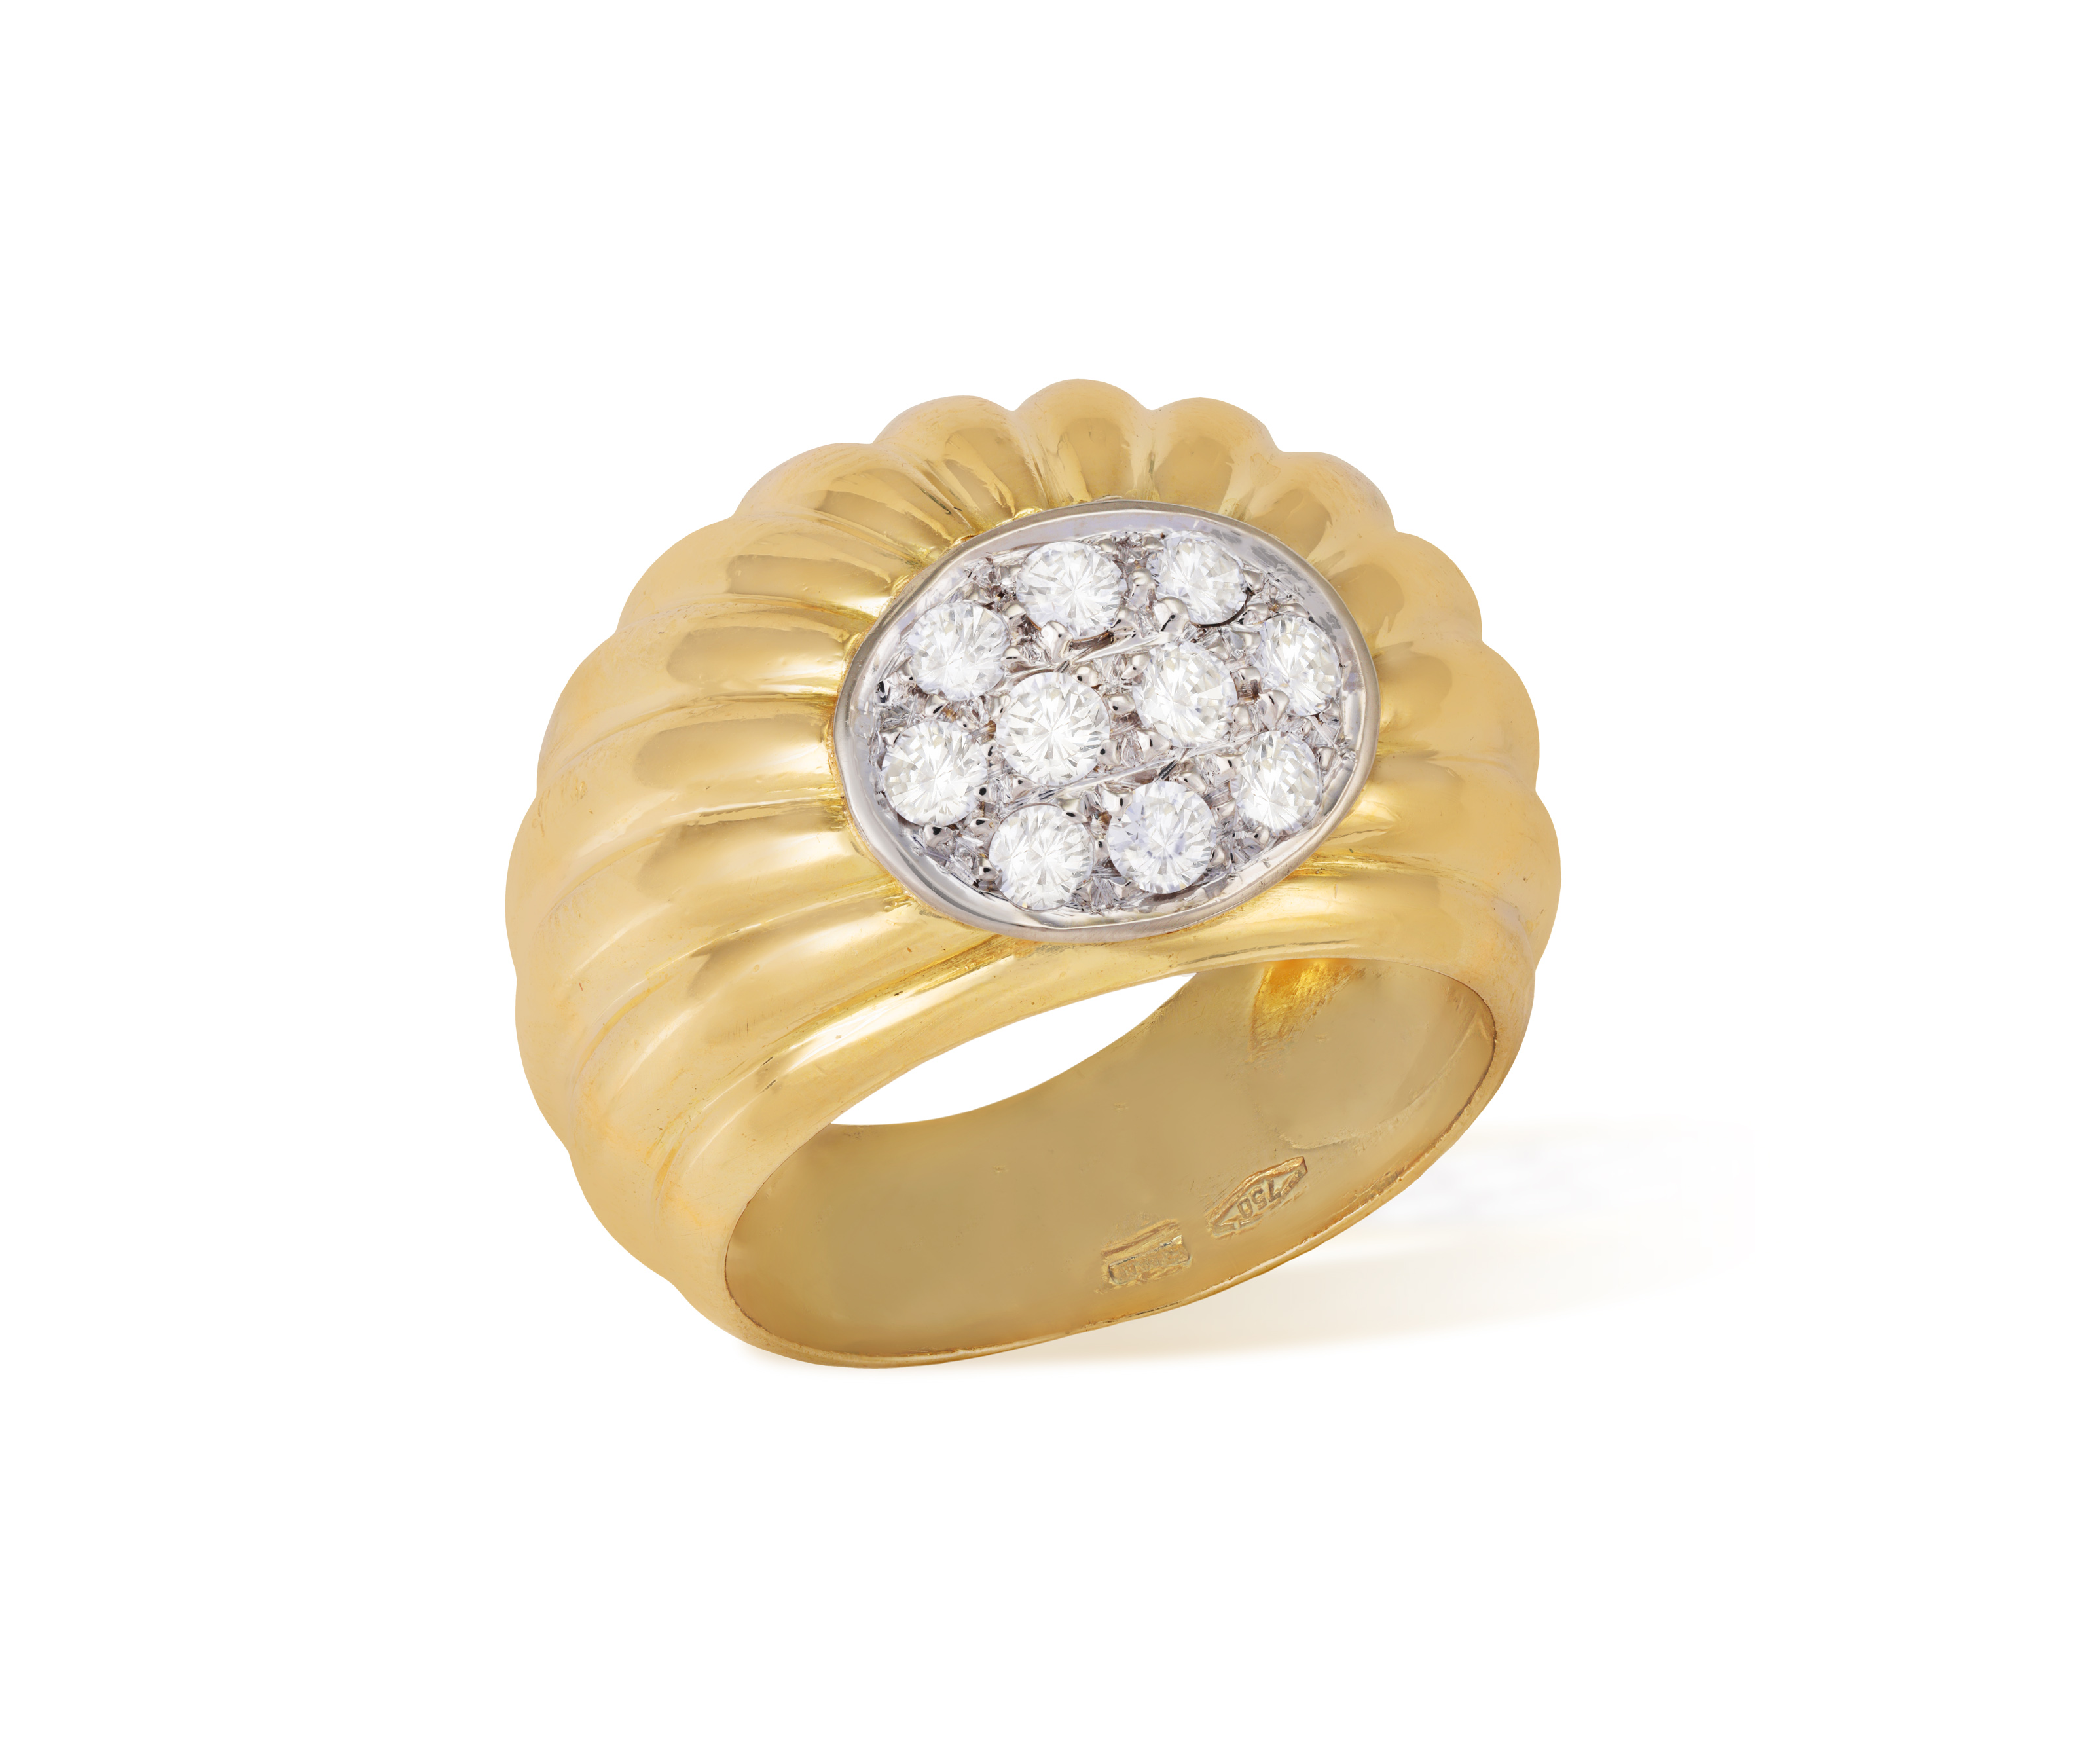 A DIAMOND DRESS RING Of bombé fluted design, centrally set with brilliant-cut diamonds, mounted in